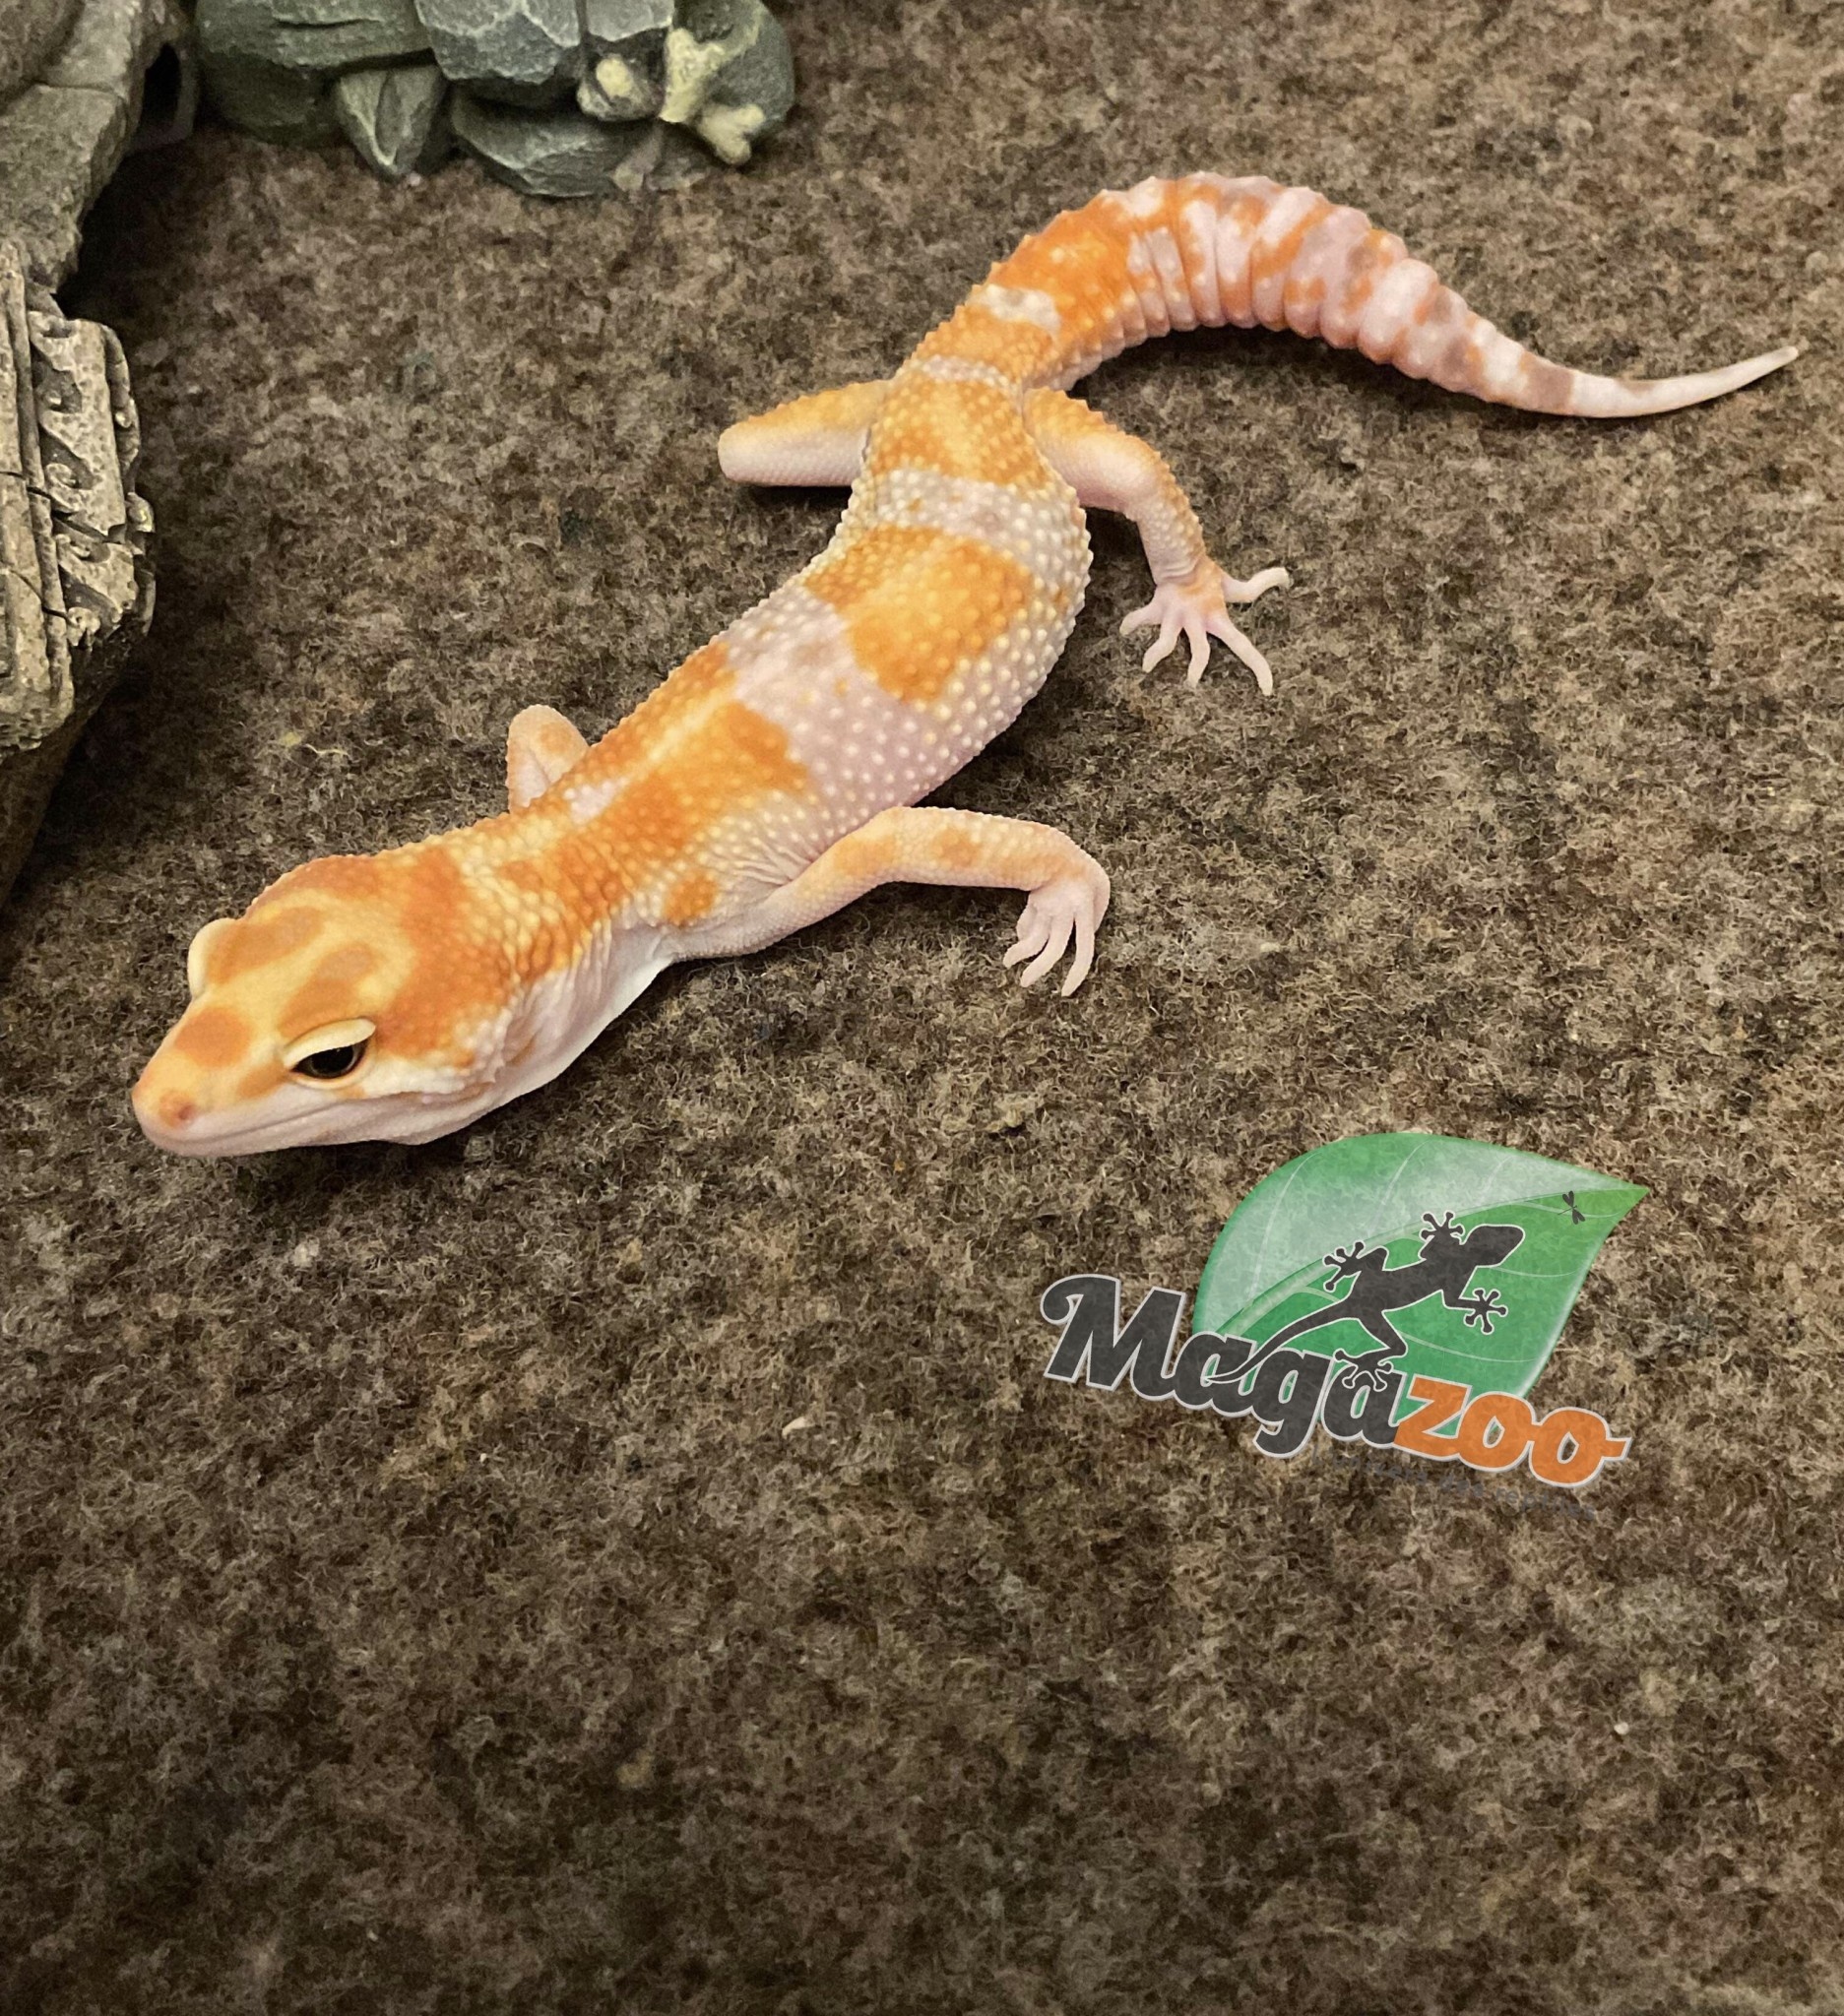 Magazoo Red Diamond Leopard Gecko male 5/6/23 #10  (SPECIAL ORDER)